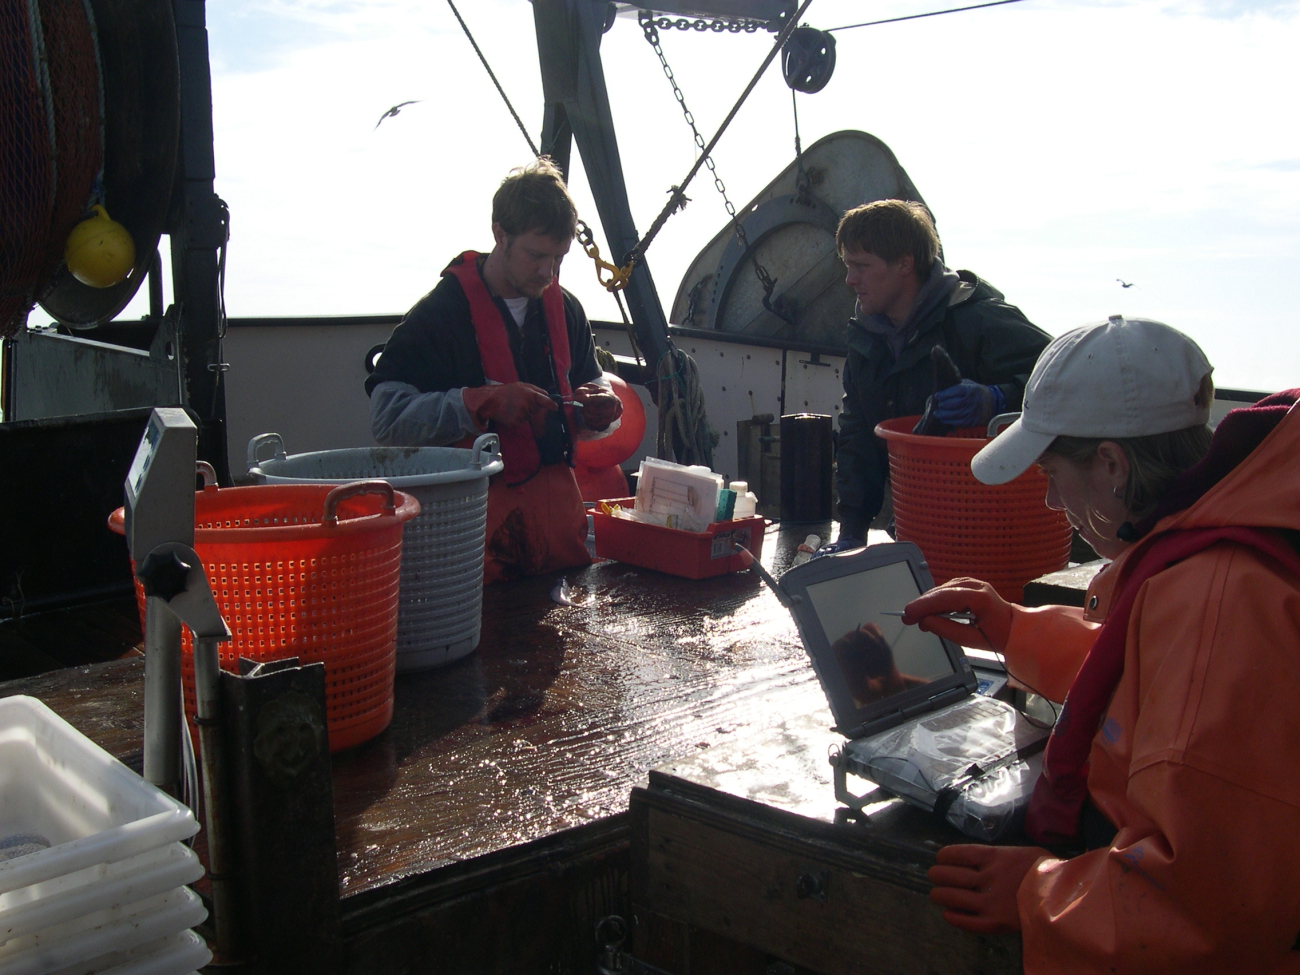 NOAA Fisheries employee's John Harms (left) and Stacey Millerwith chartered vessel crewman Mike Retherford working up a sample obtainedaboard the F/V Excalibur during the 2003 west coast groundfish trawl survey